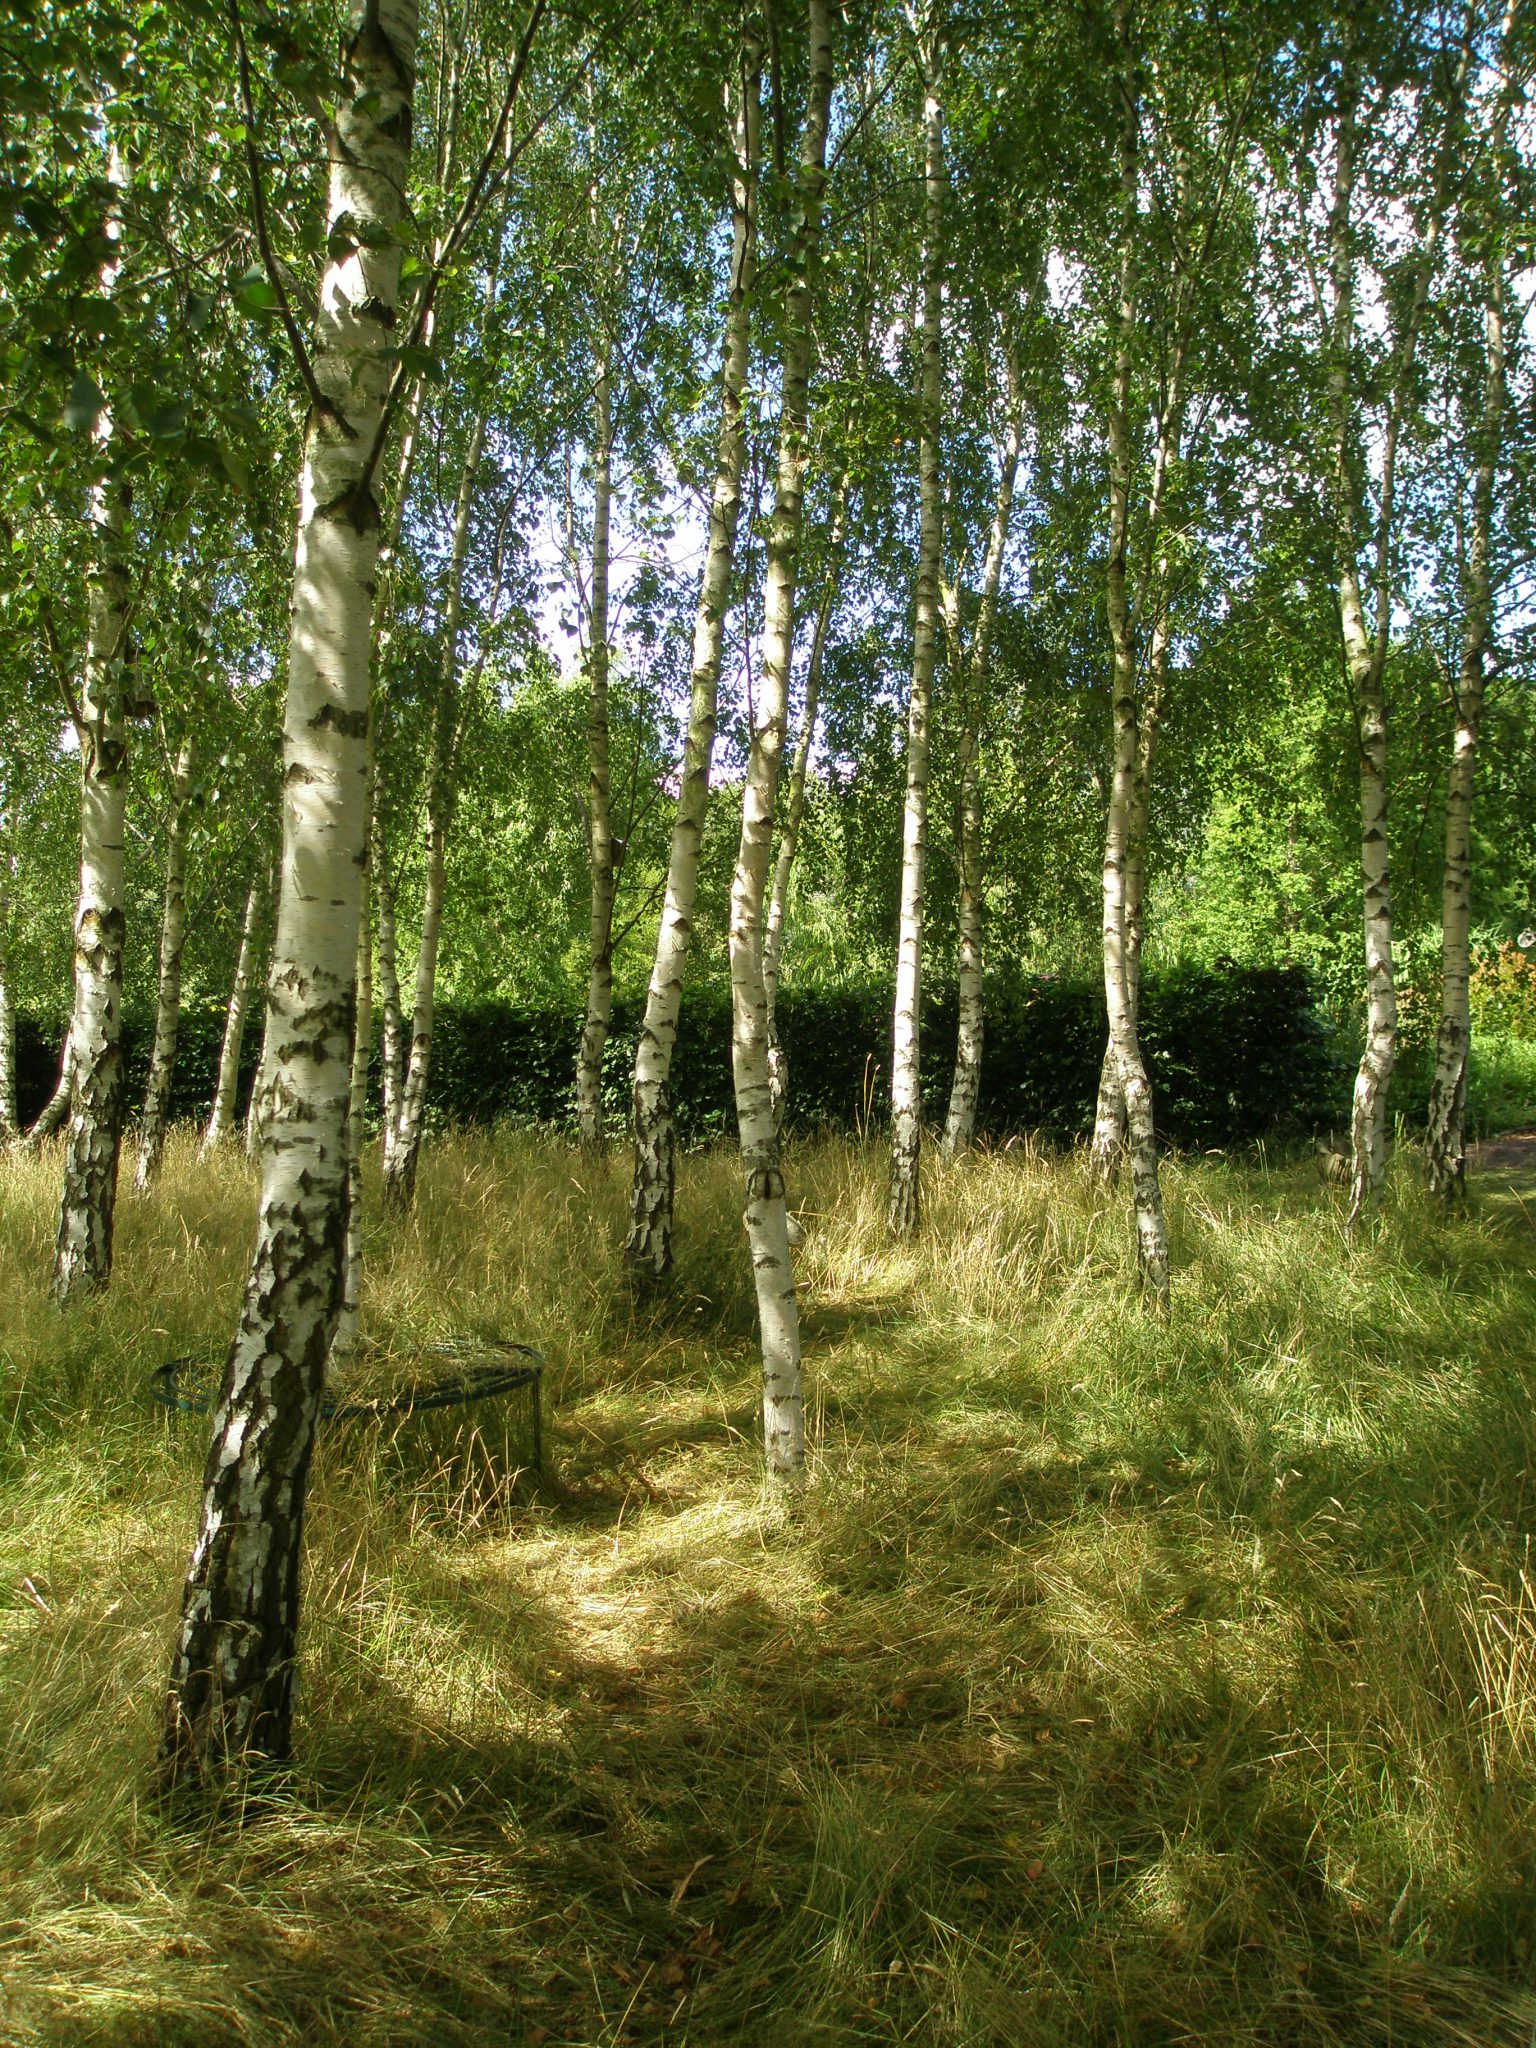 Or perhaps you'd like an entire birch grove? No problem....